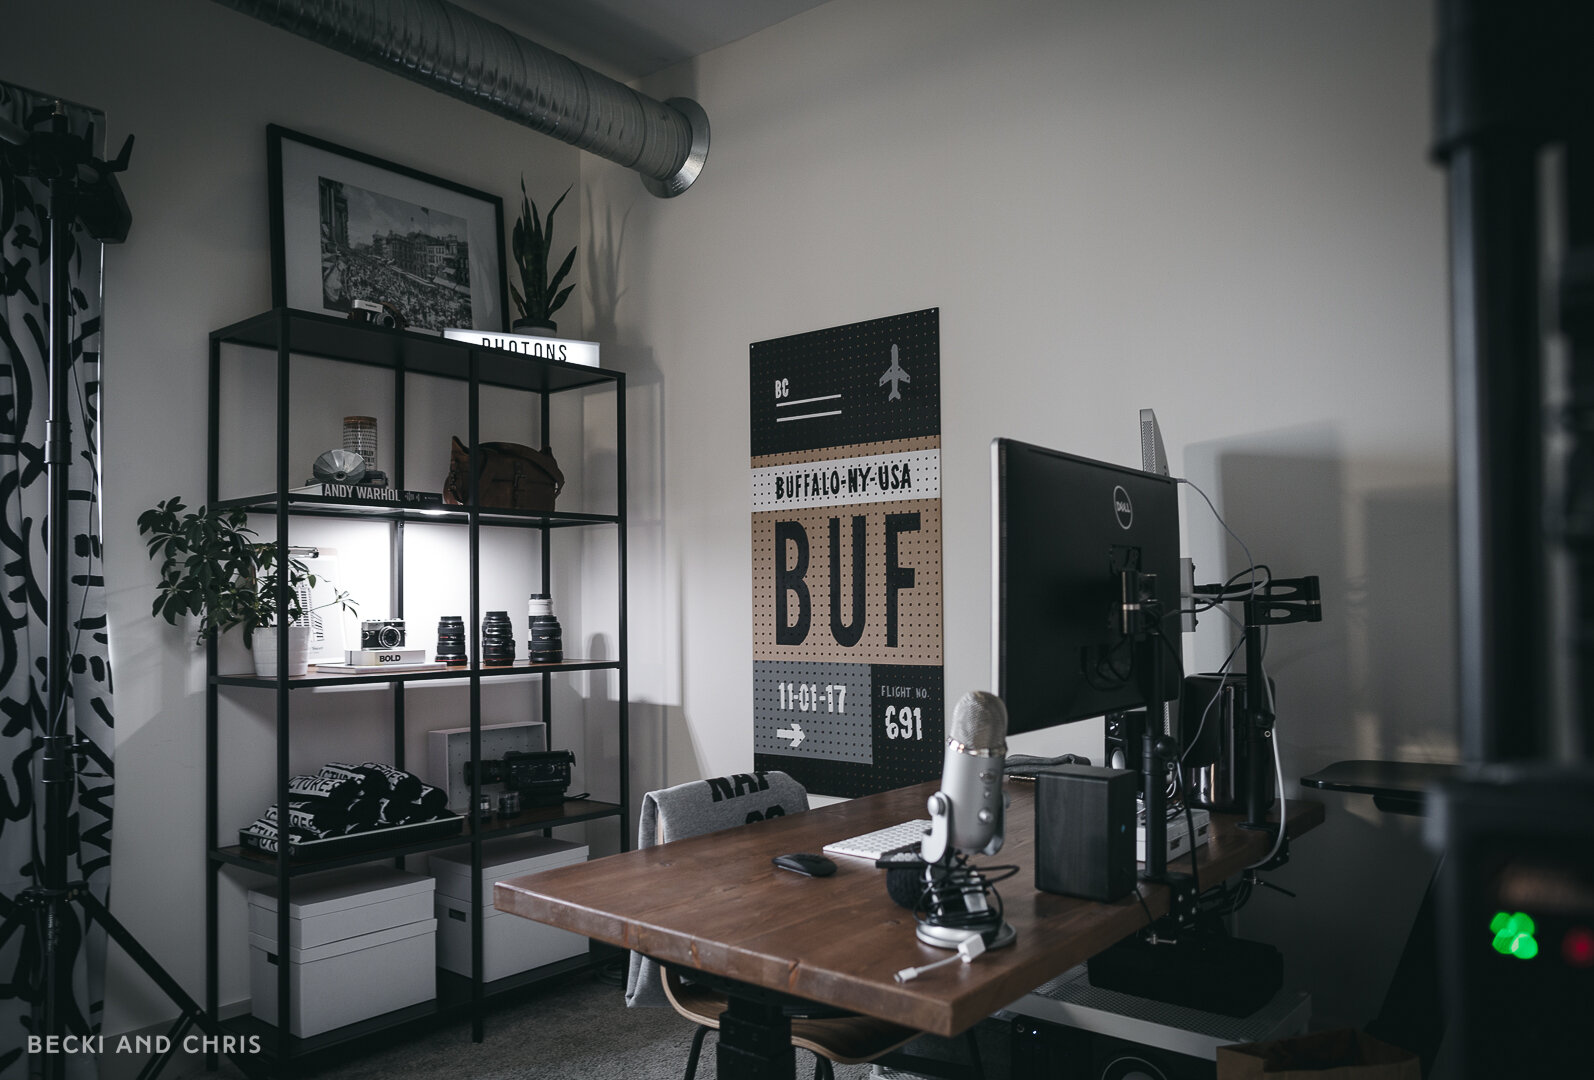    How to style a shelf   , Buffalo Pegboard by&nbsp;   Snack Paintings   &nbsp;   Originally we had the desk pushed up against the wall but in the end decided to float it which helped break up the space into two distinct working spaces. Moving the d